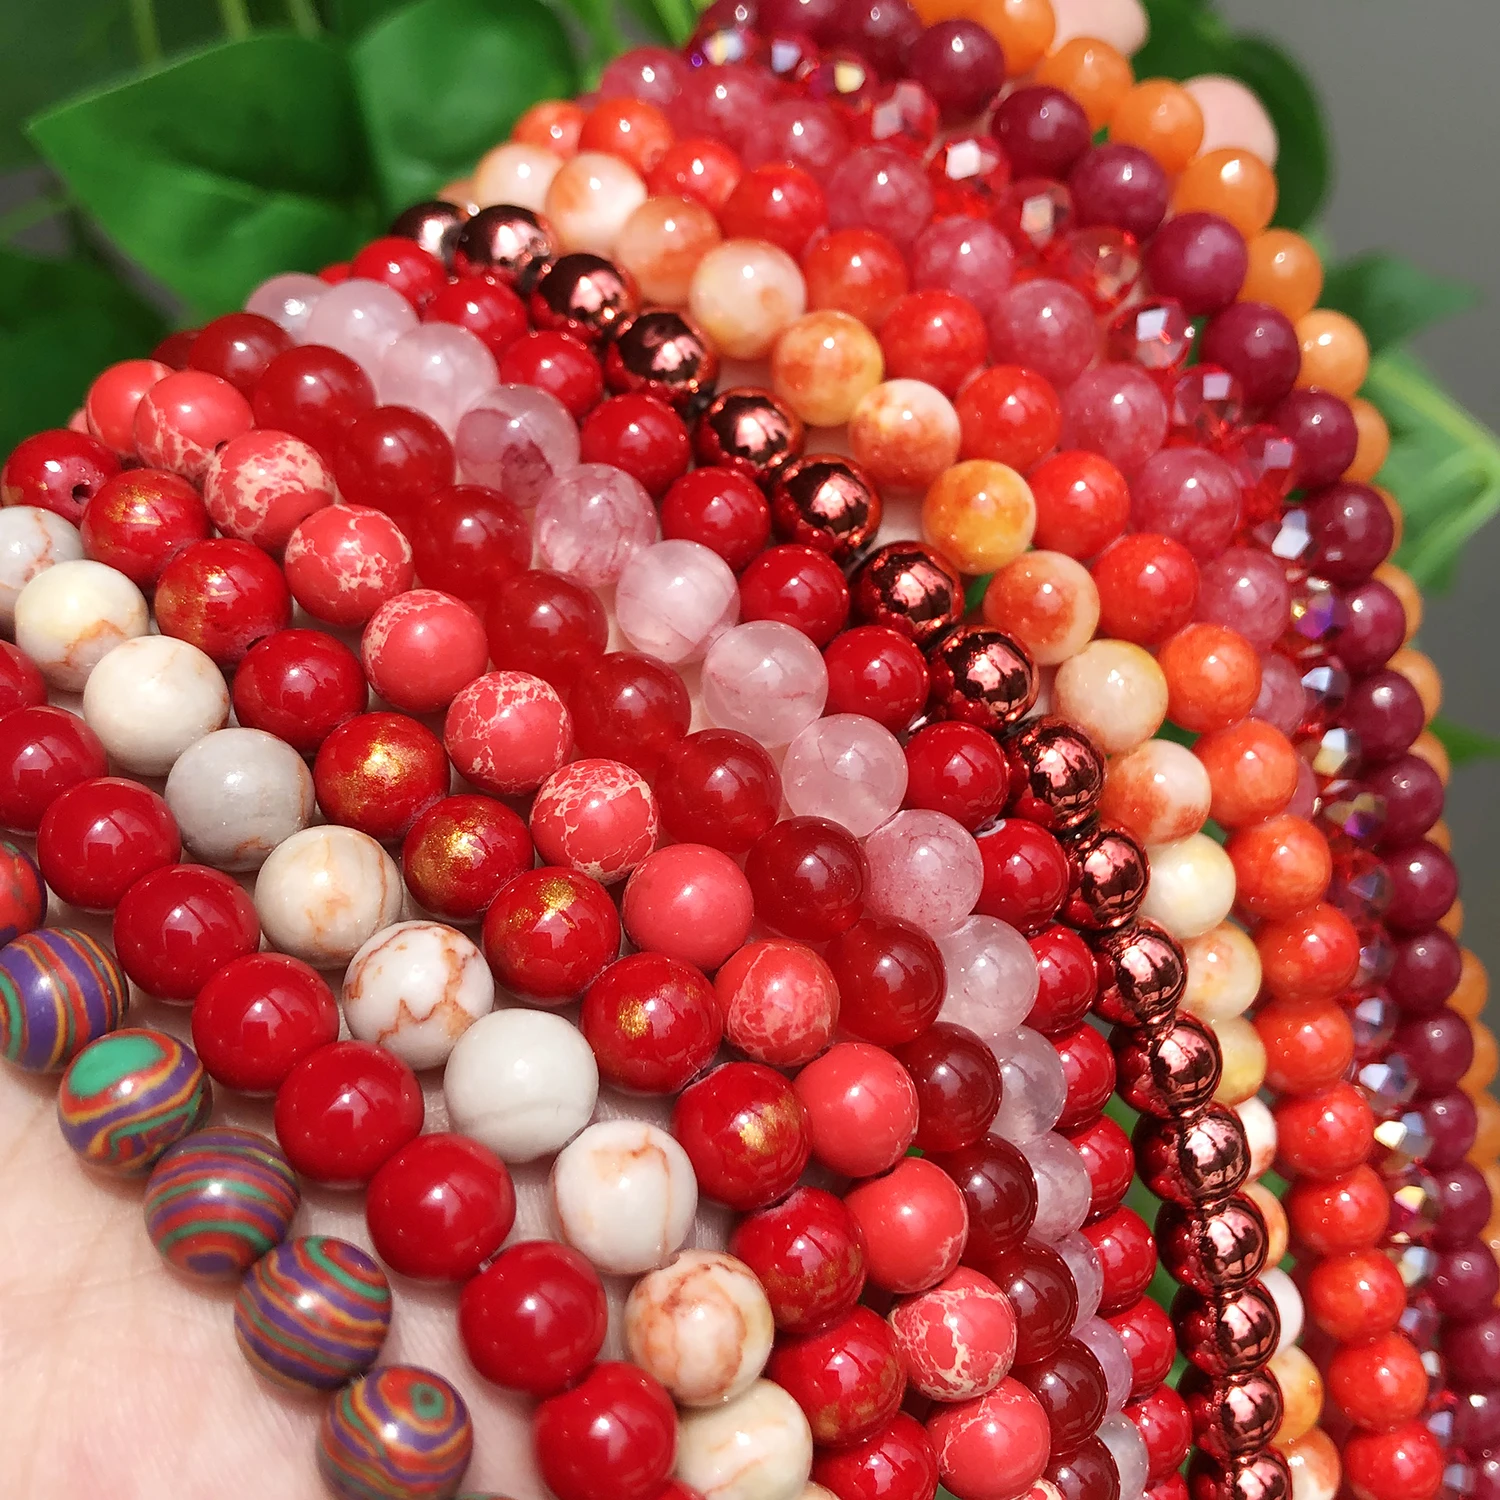 Red Coral Jades Beads Natural Stone Chalcedony Agates Round Loose Mineral Beads for Jewelry Making DIY Handmade Bracelet 15''